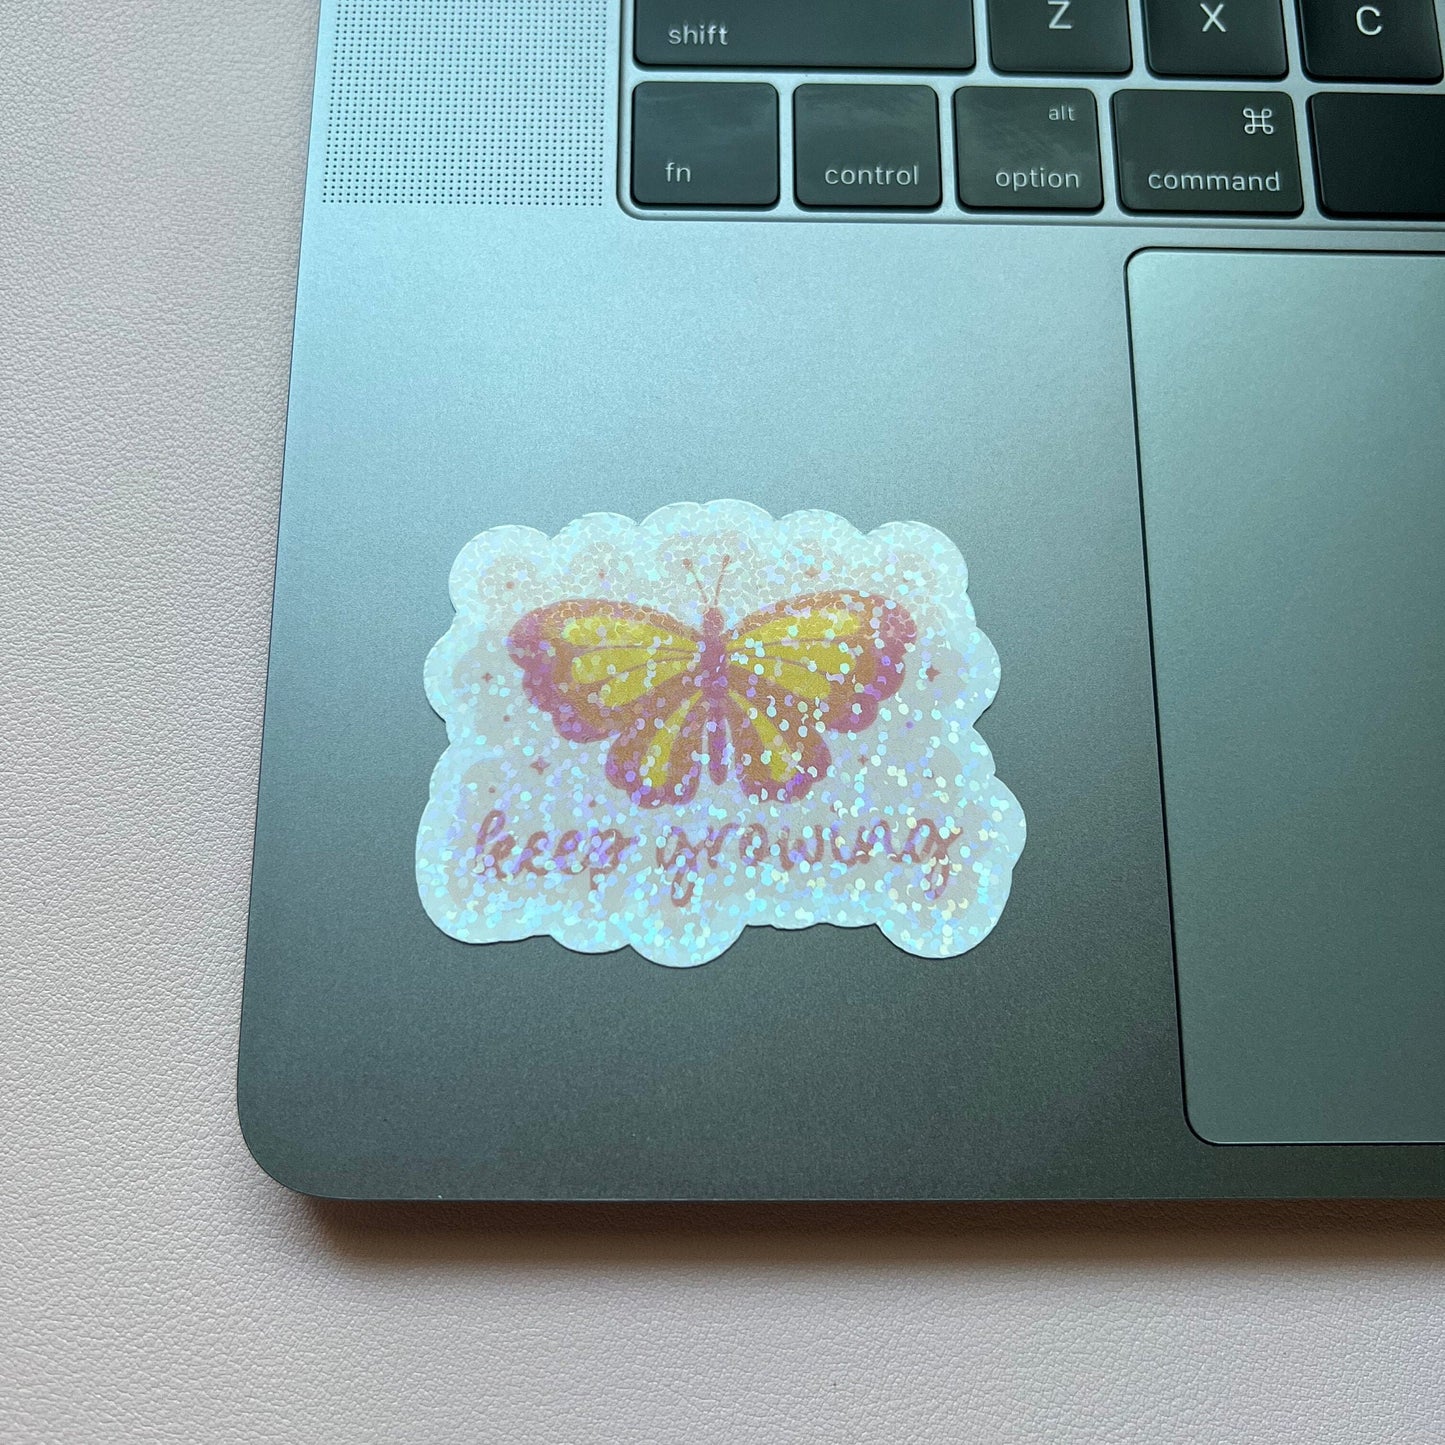 Holographic Sticker Keep Growing